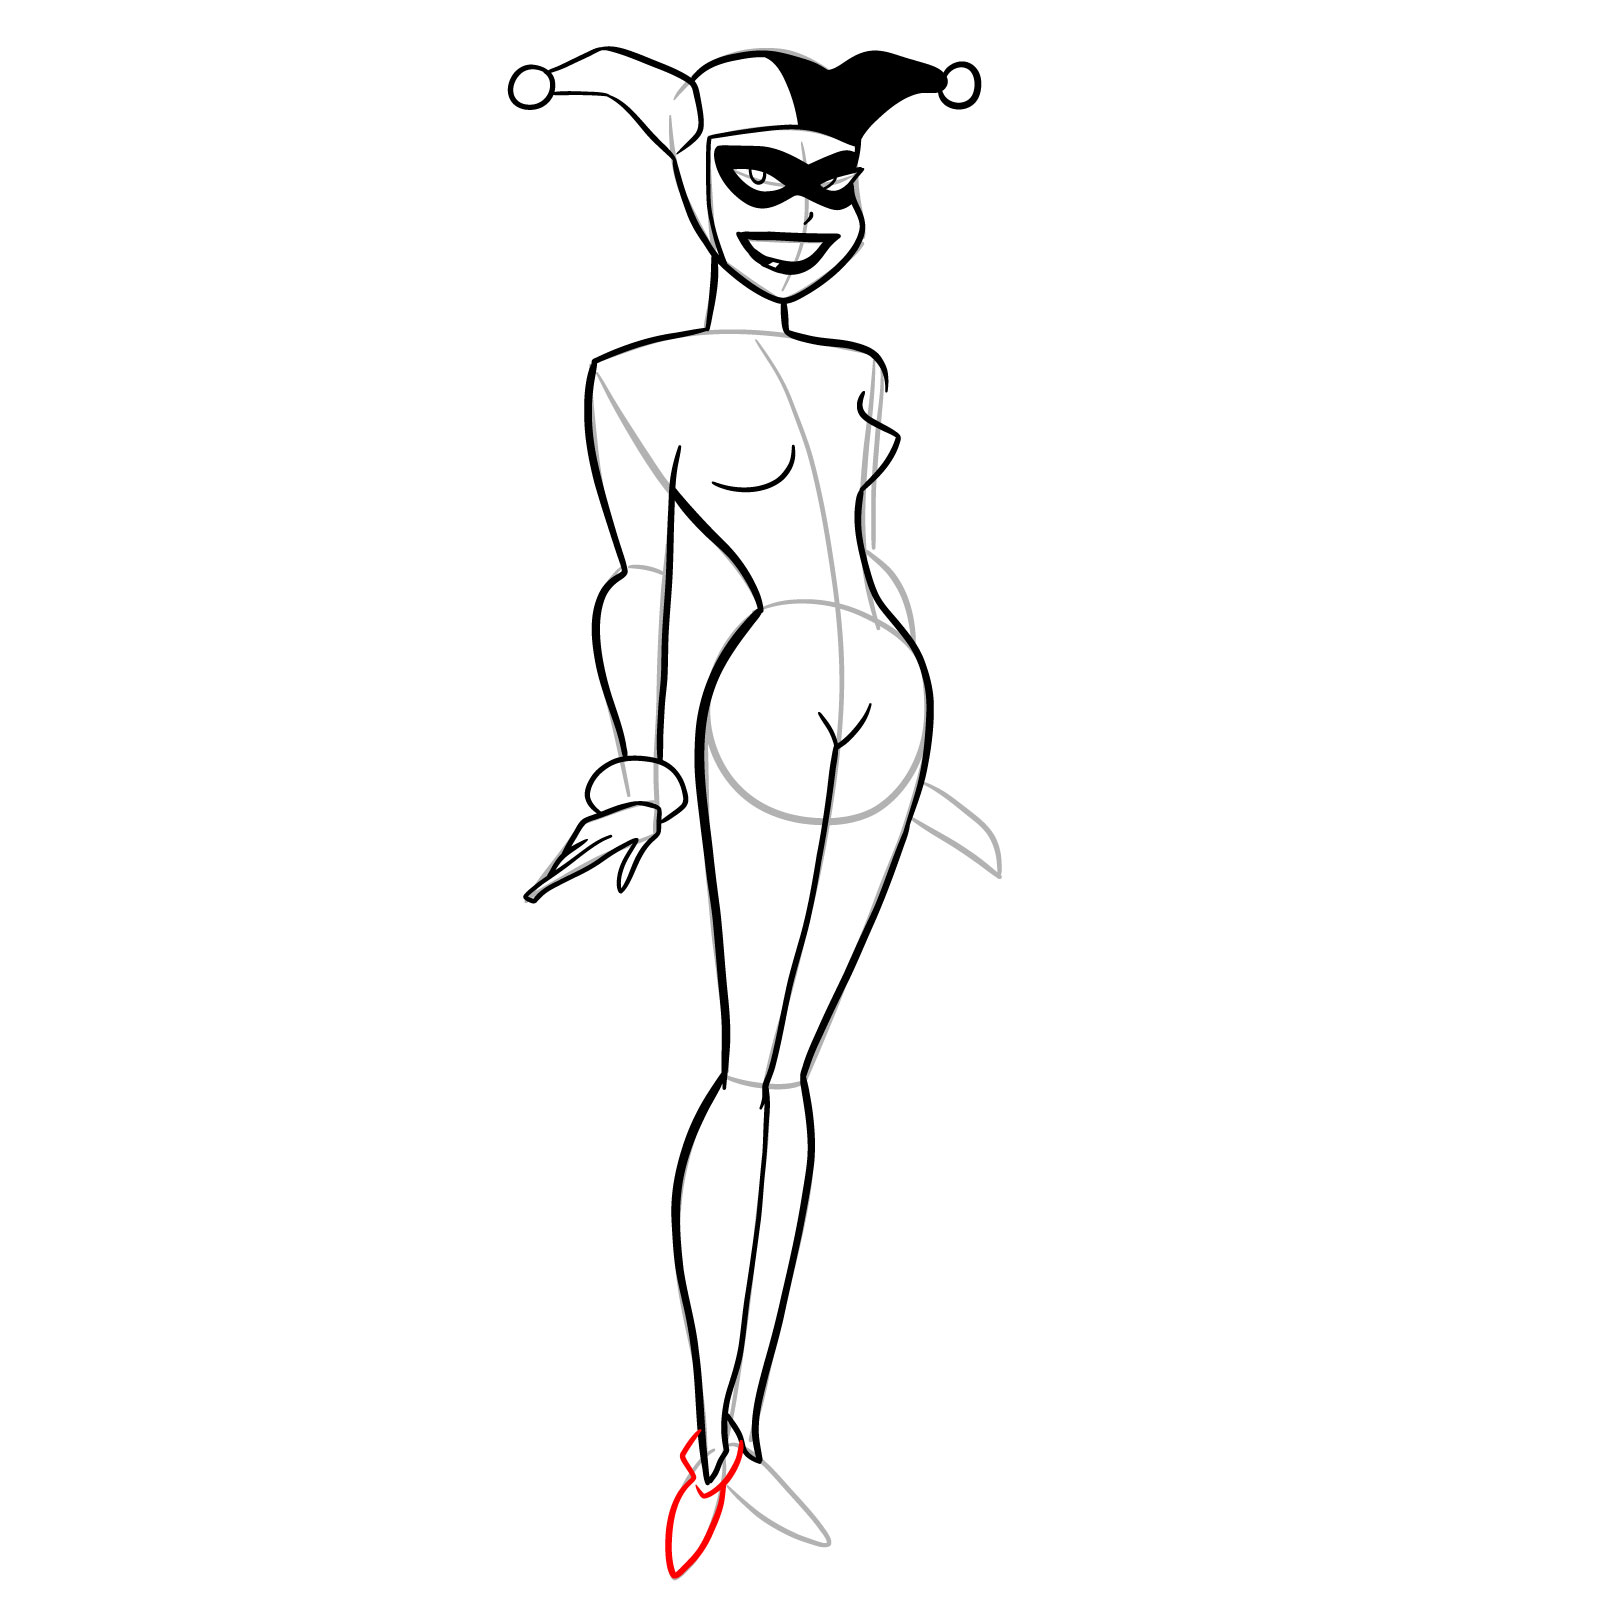 How to draw Harley Quinn in a classic suit - step 18